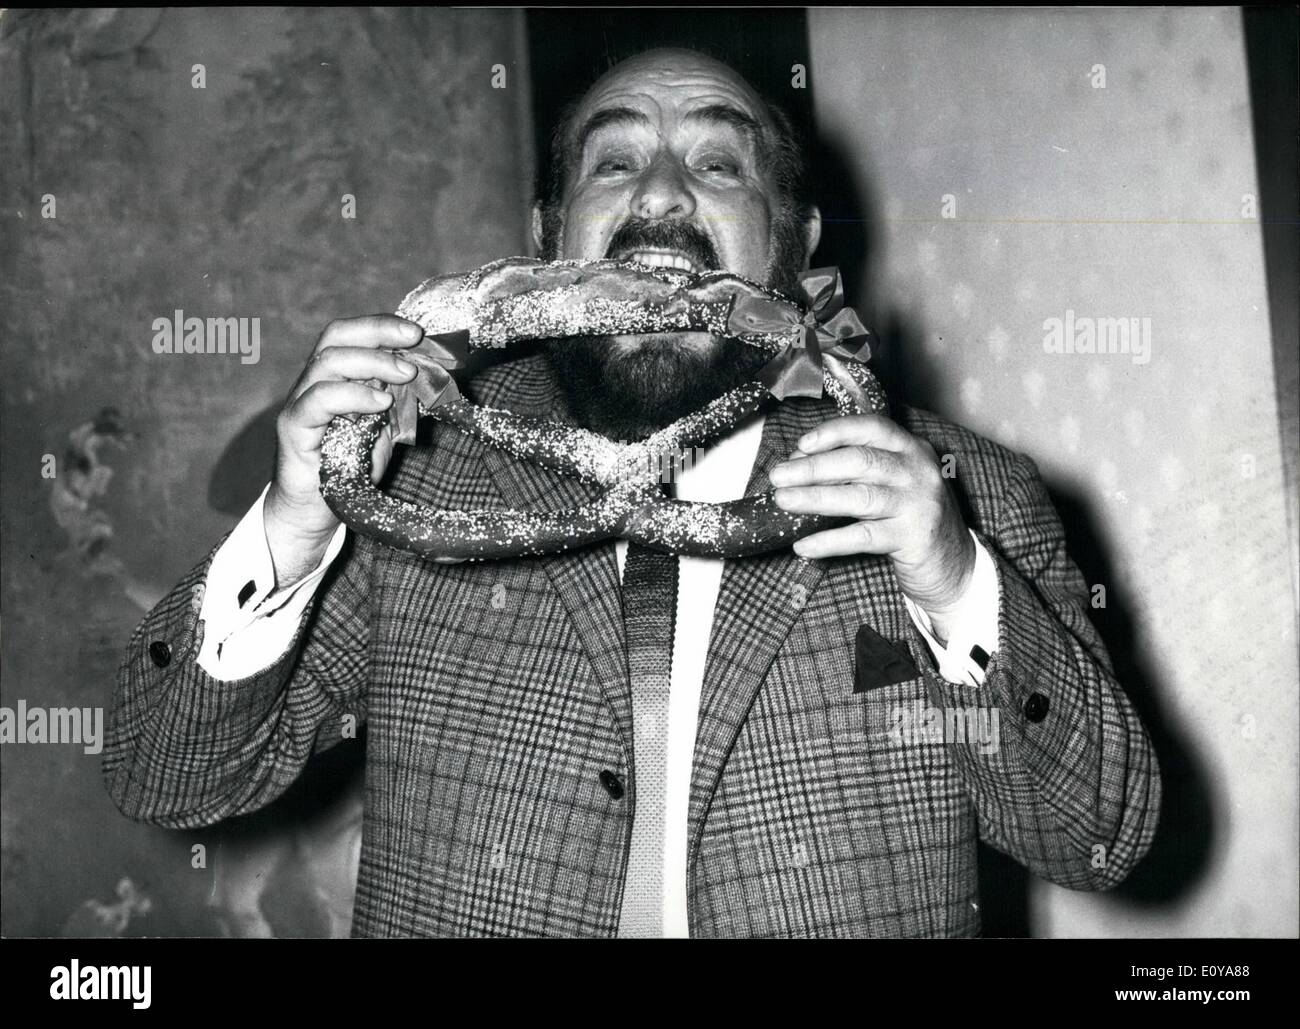 Sep. 09, 1969 - Pictured is Shmuel Rodensky. For years he has played the milkman in the musical ''Fiddler on the Roof,'' and will be portraying the role again on September 3 in the German Theater in Munich. The 61 year old actor from Israel played ''Milkman Tevje'' for many Stock Photo